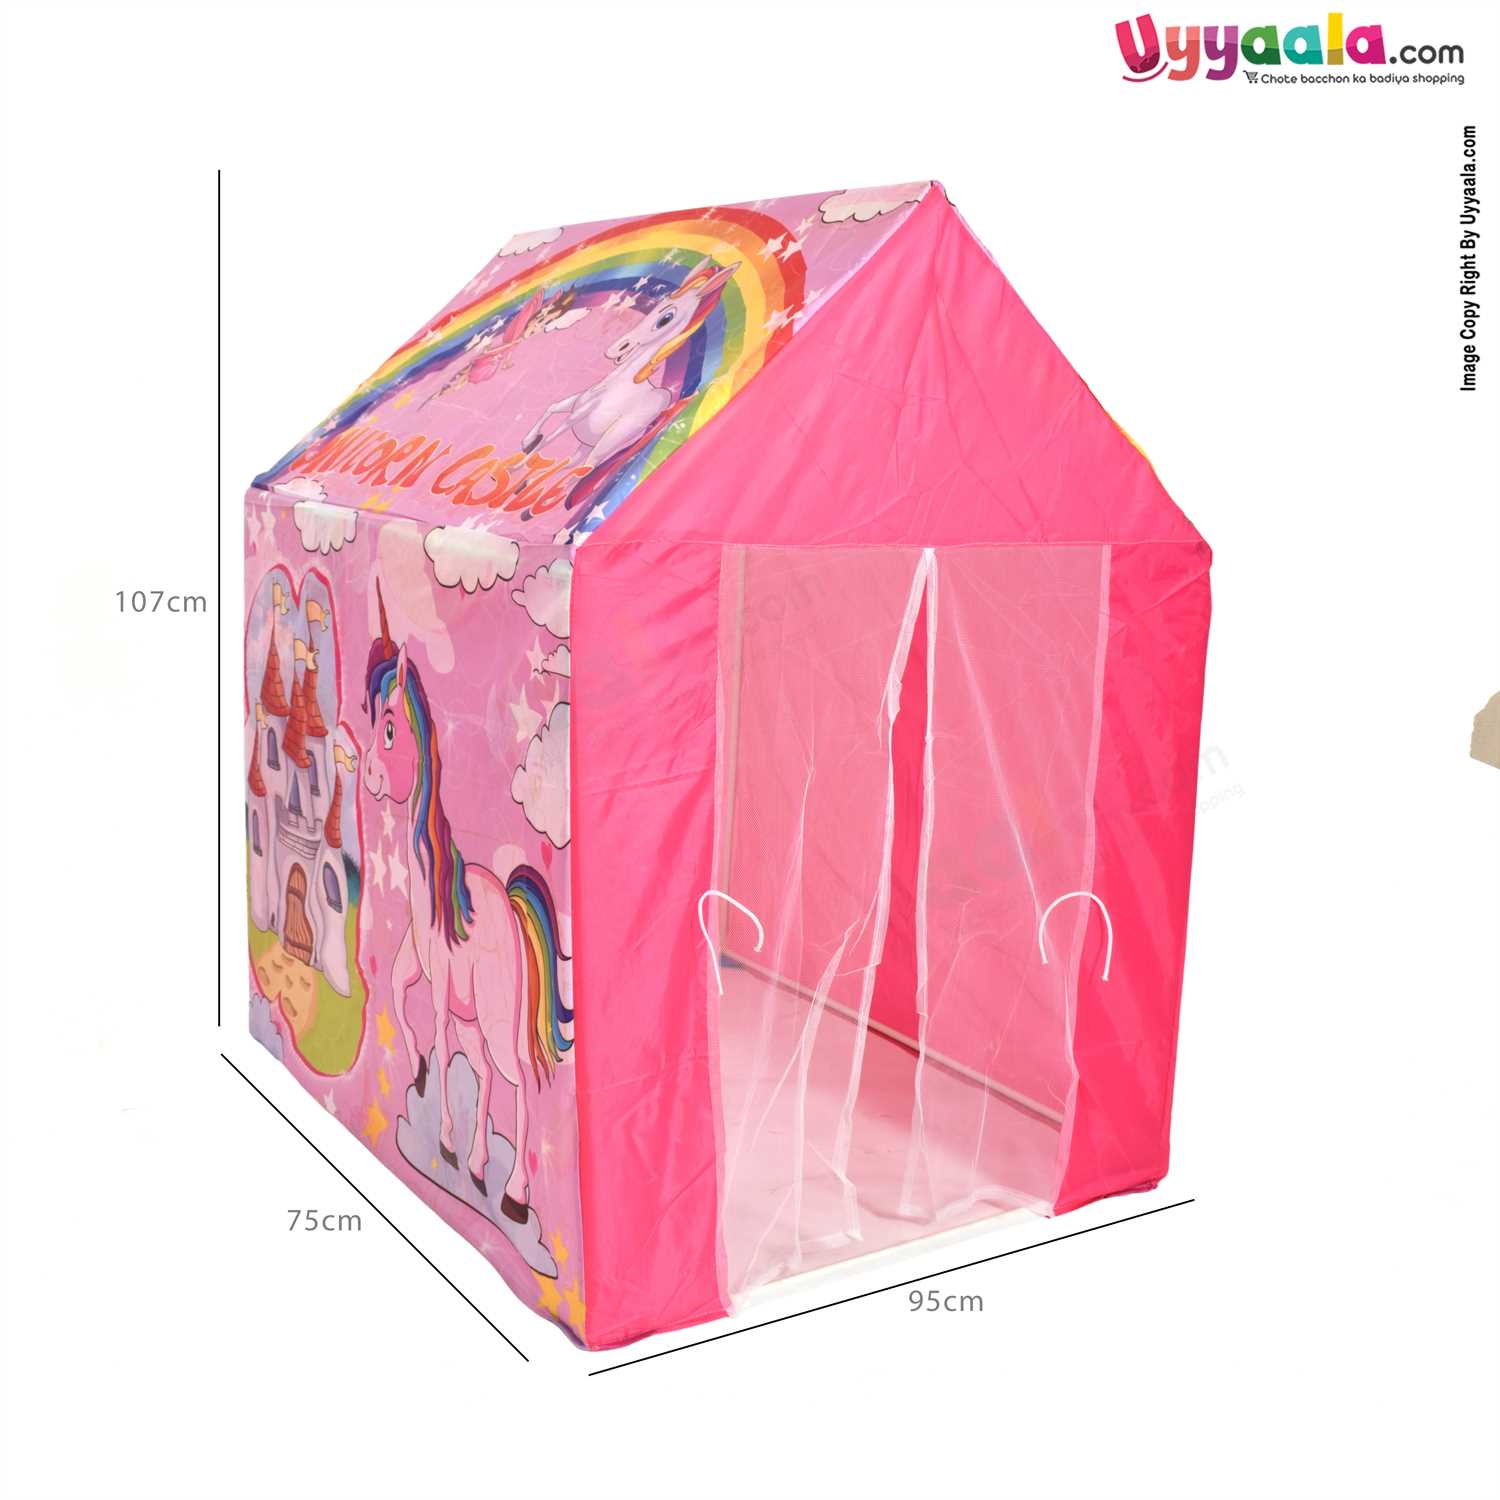 Unicorn castle printed tent house for kids play